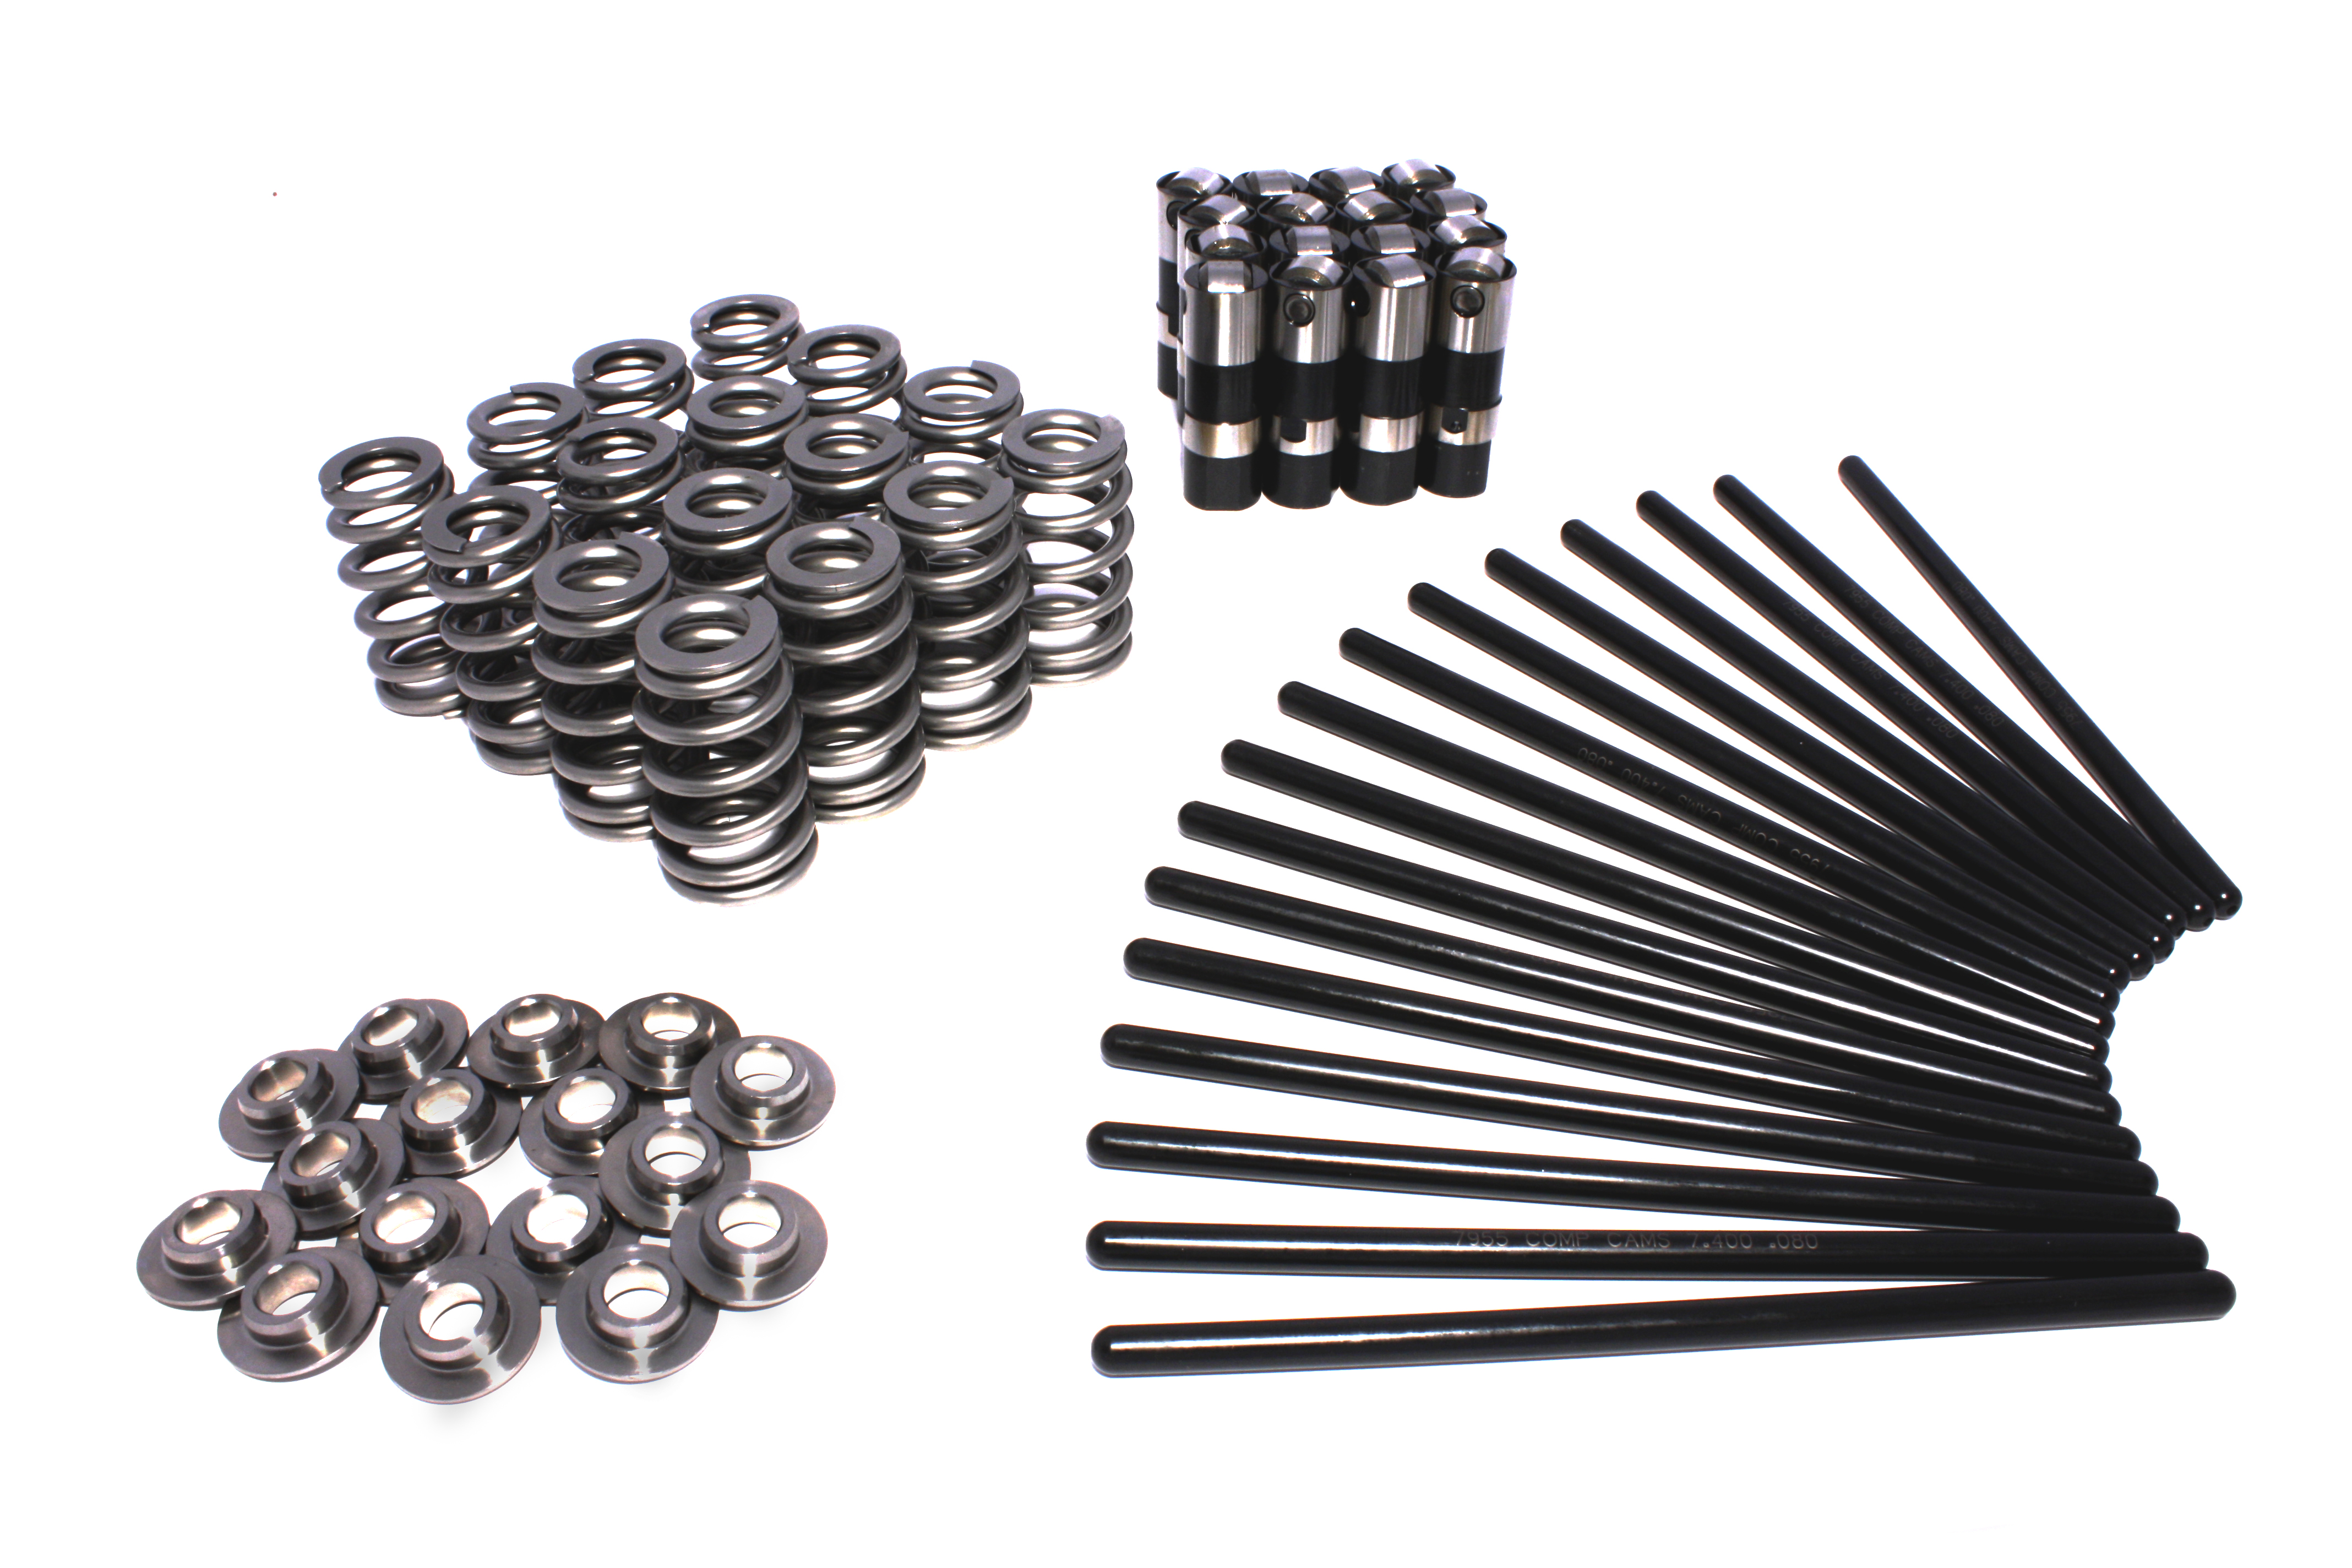 Pushrod, Spring, Retainer and Lifter Kit for GM LS